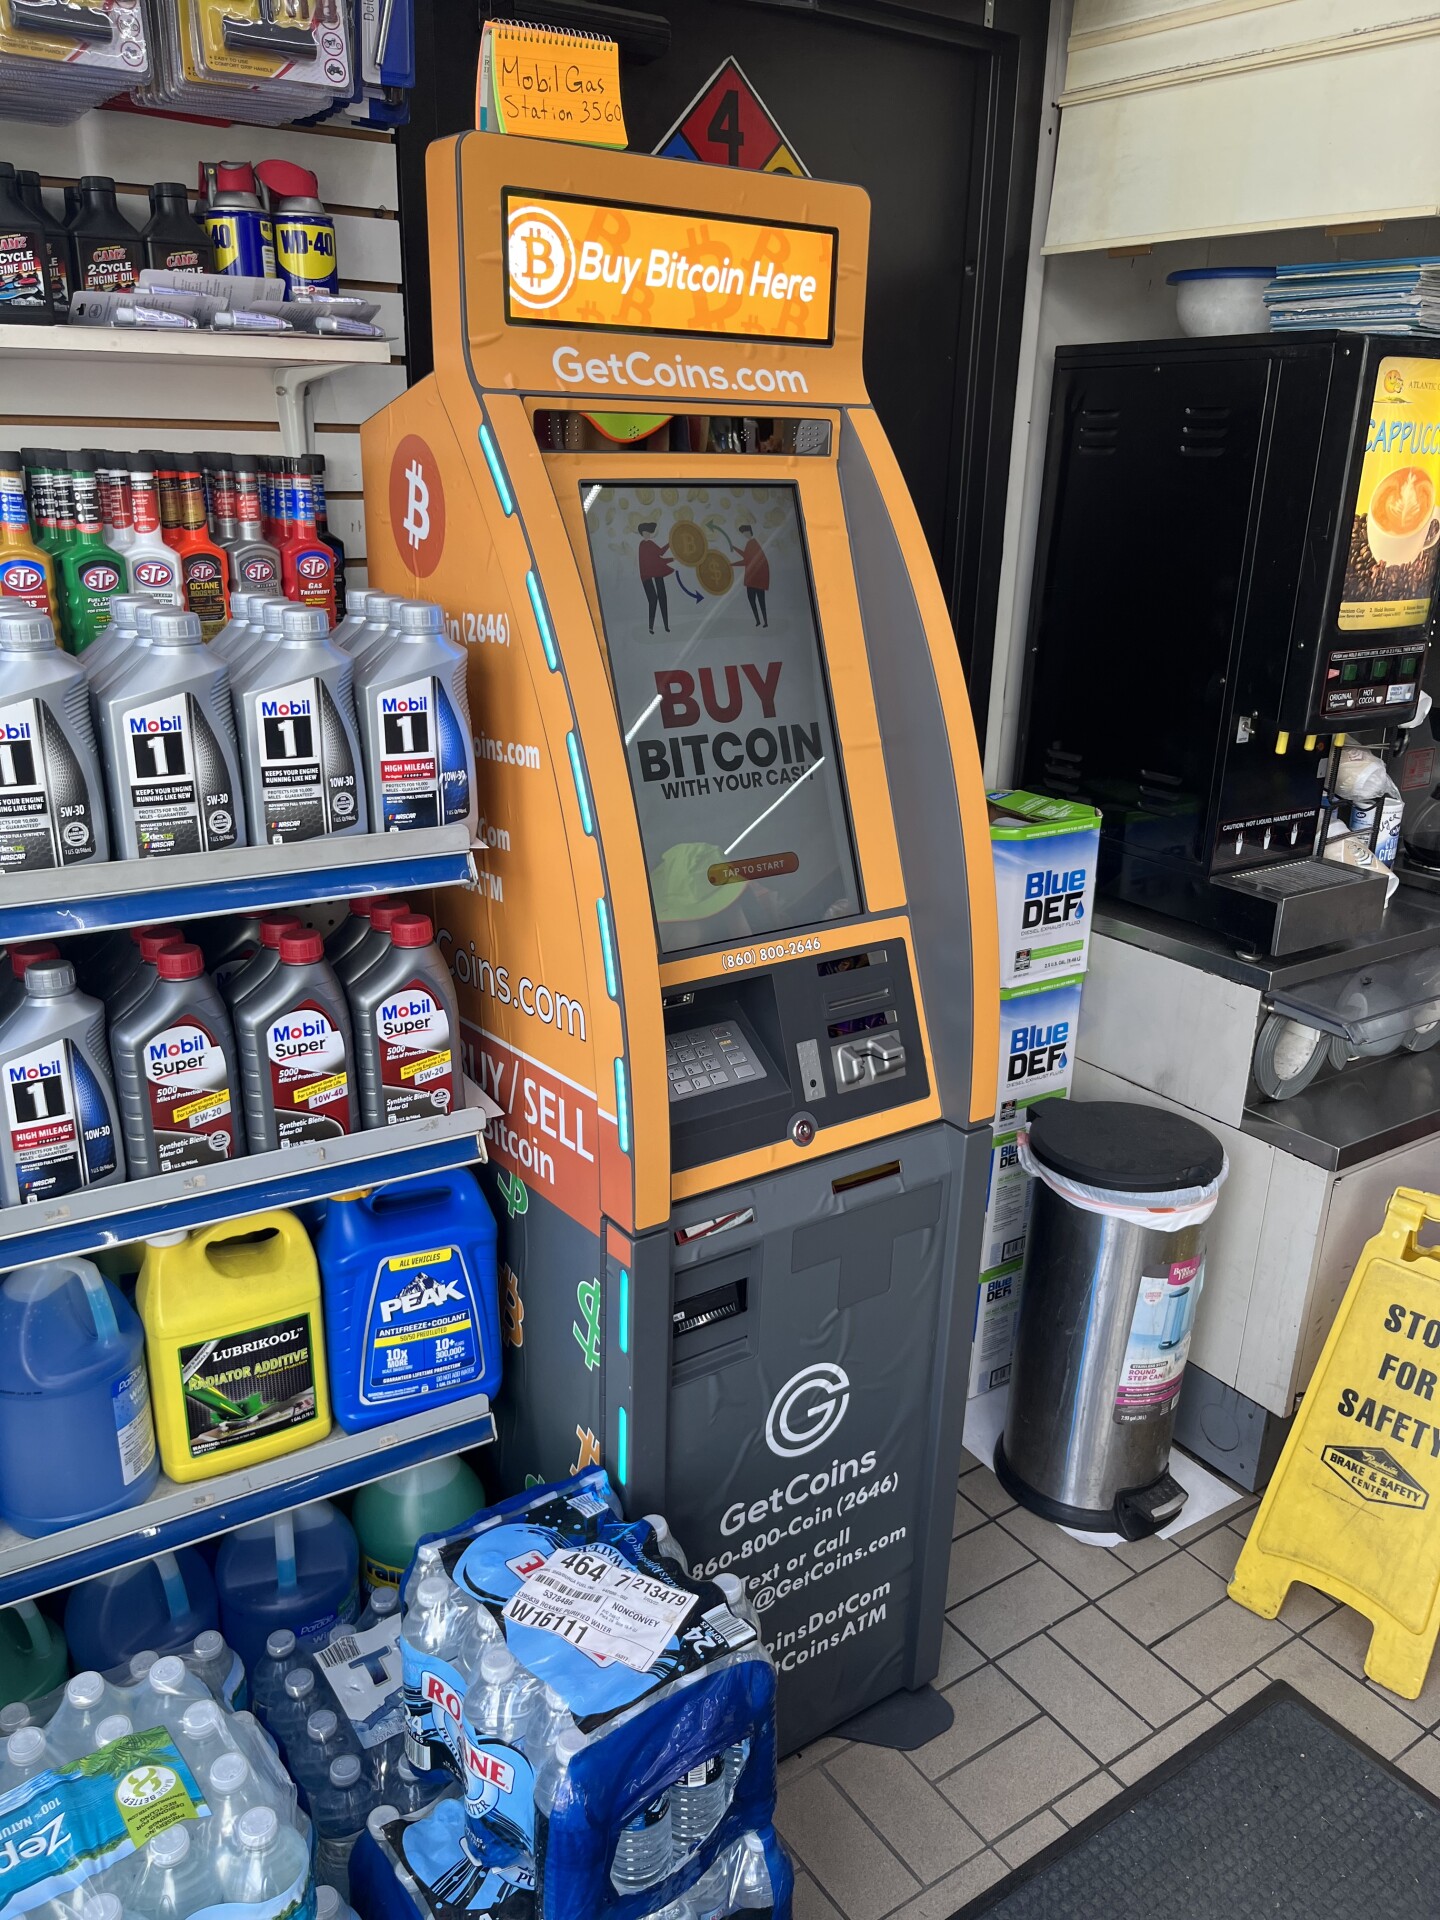 Getcoins - Bitcoin ATM - Inside of Mobil Mart in Pompano Beach, Florida